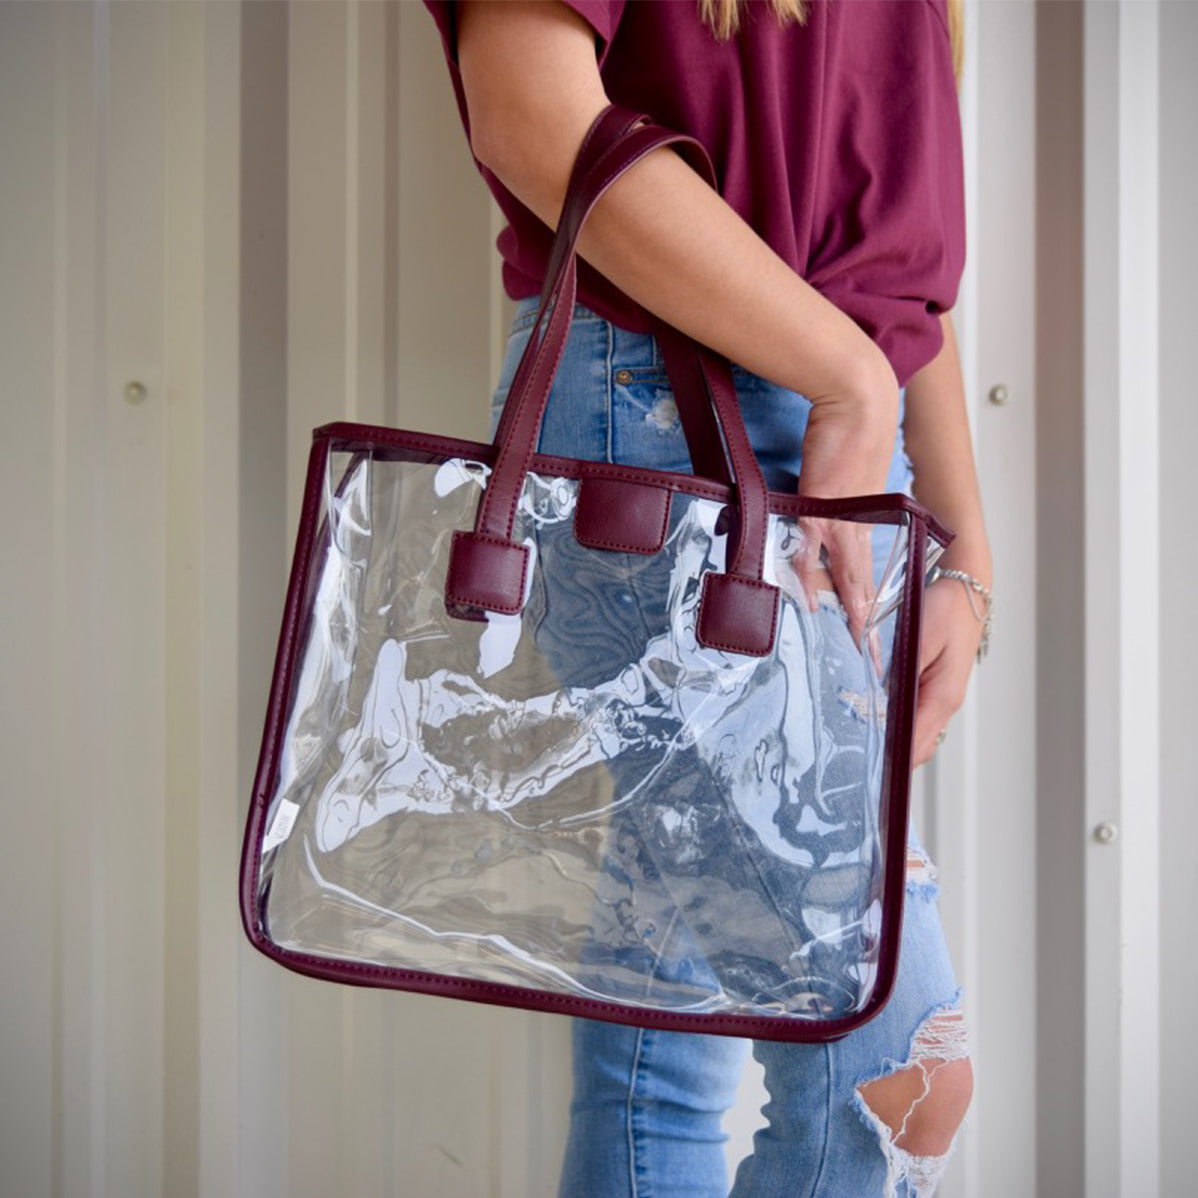 Maroon Leather Strap Clear Tote